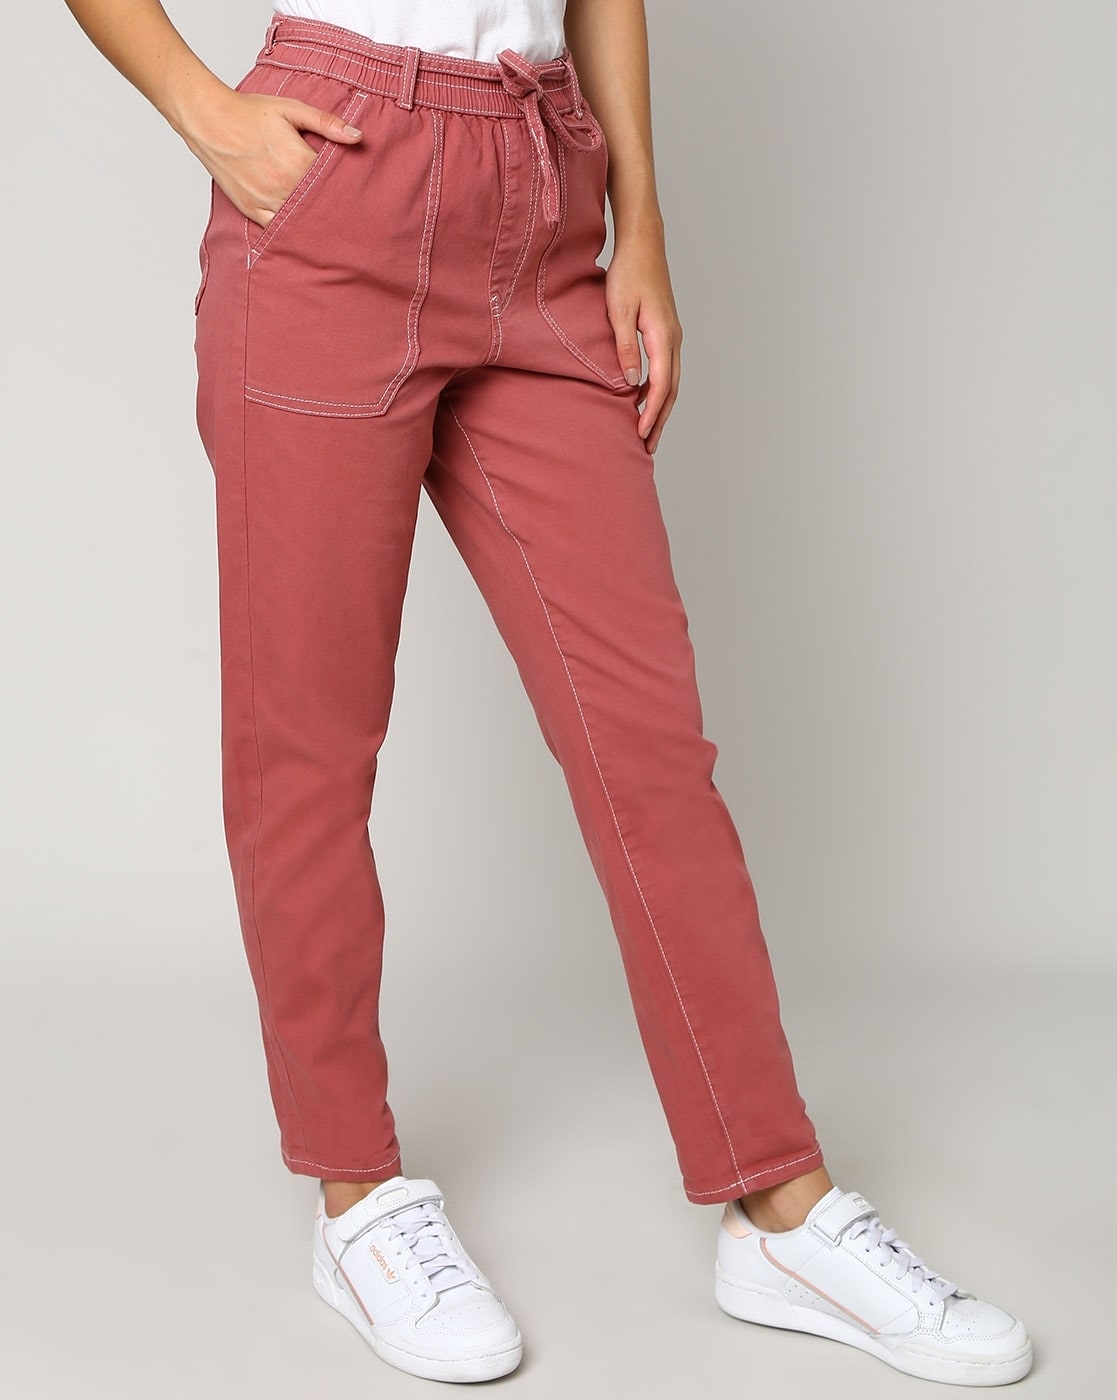 Buy Pink Trousers & Pants for Women by Marks & Spencer Online